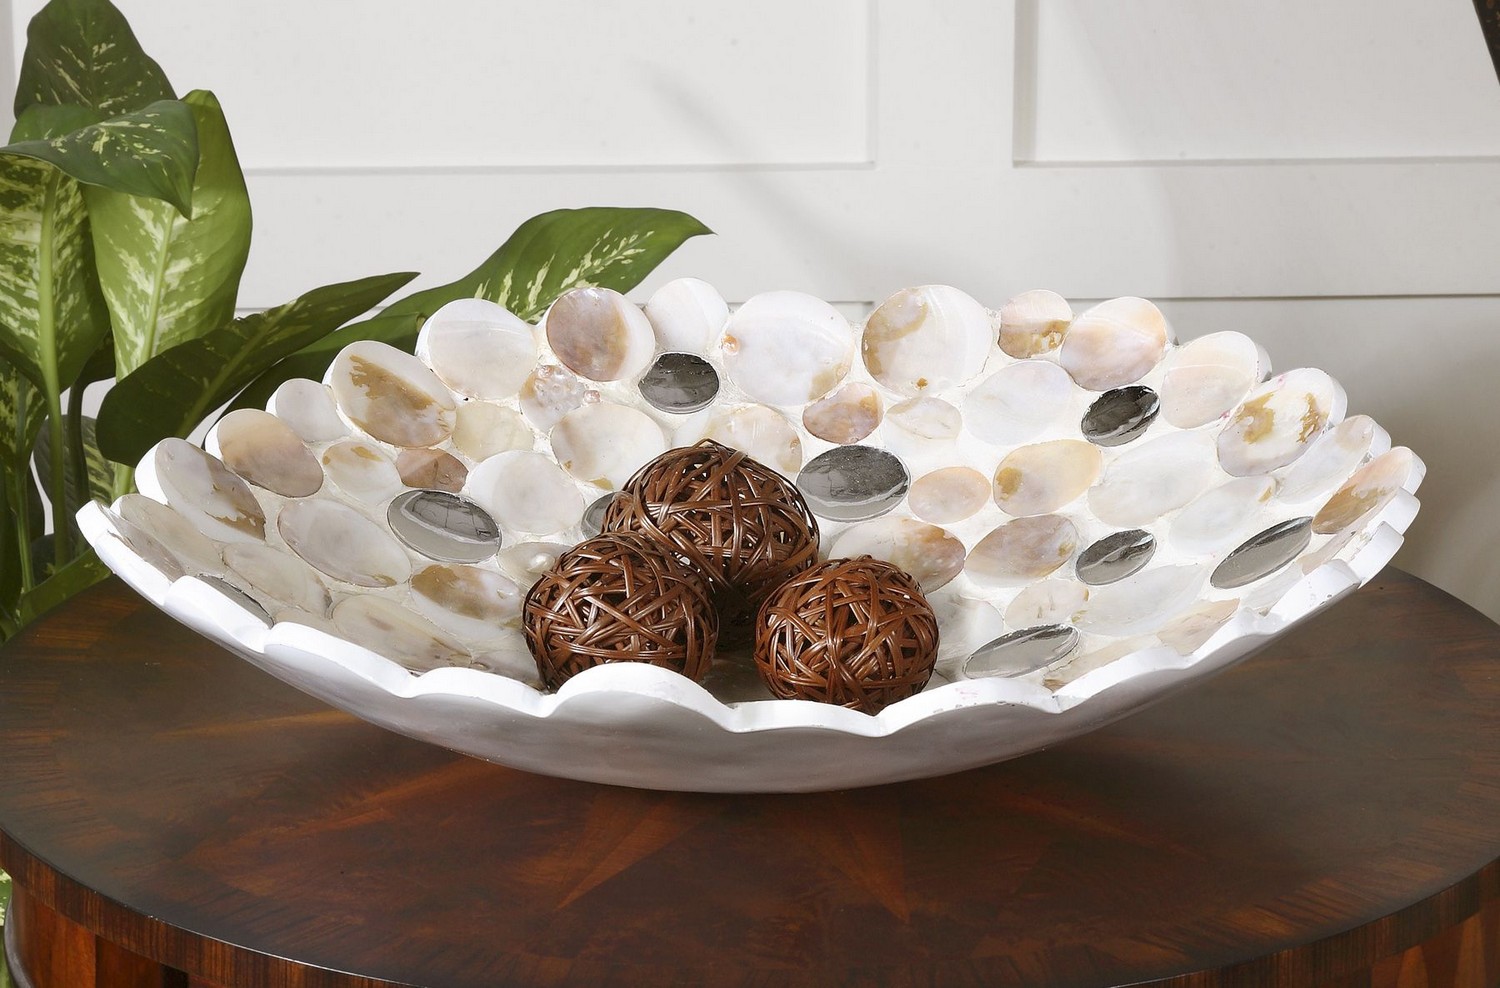 Uttermost Capiz Shell Accented Bowl